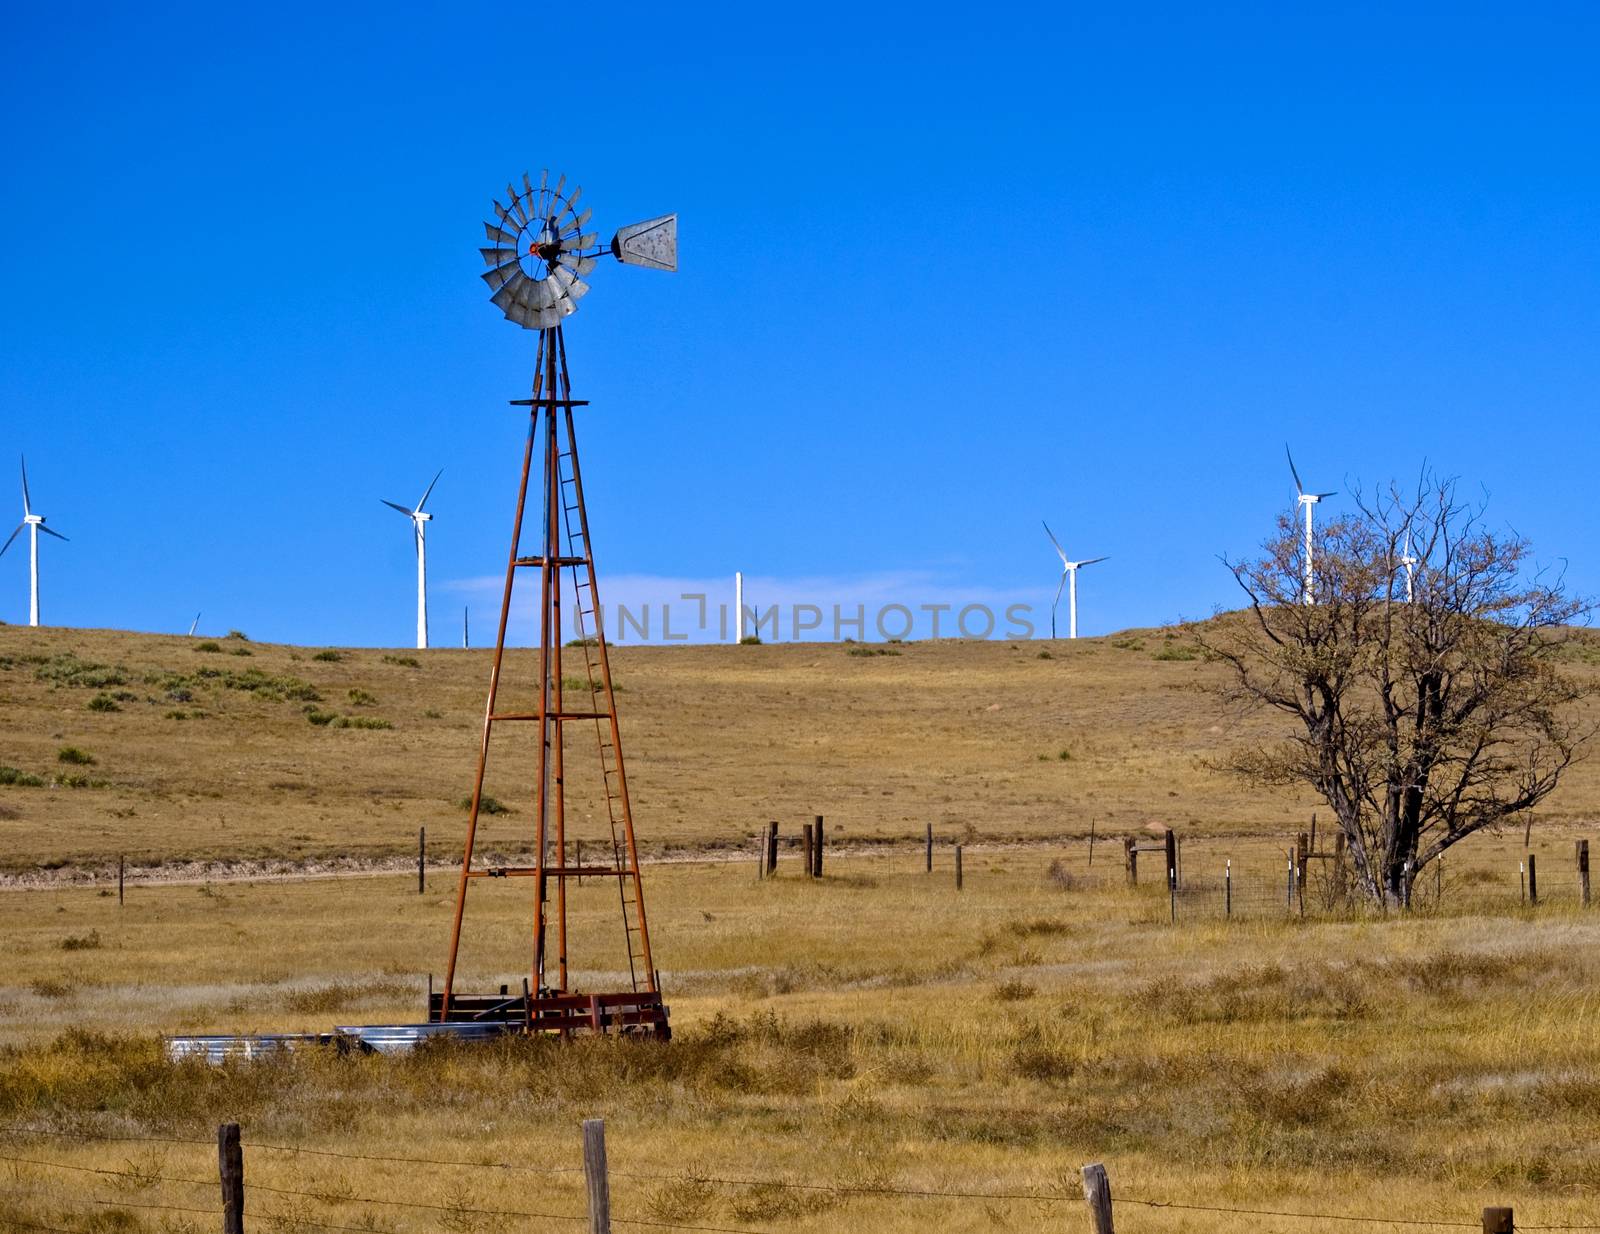 An old wind driven water well is surrounded by new wind generators.